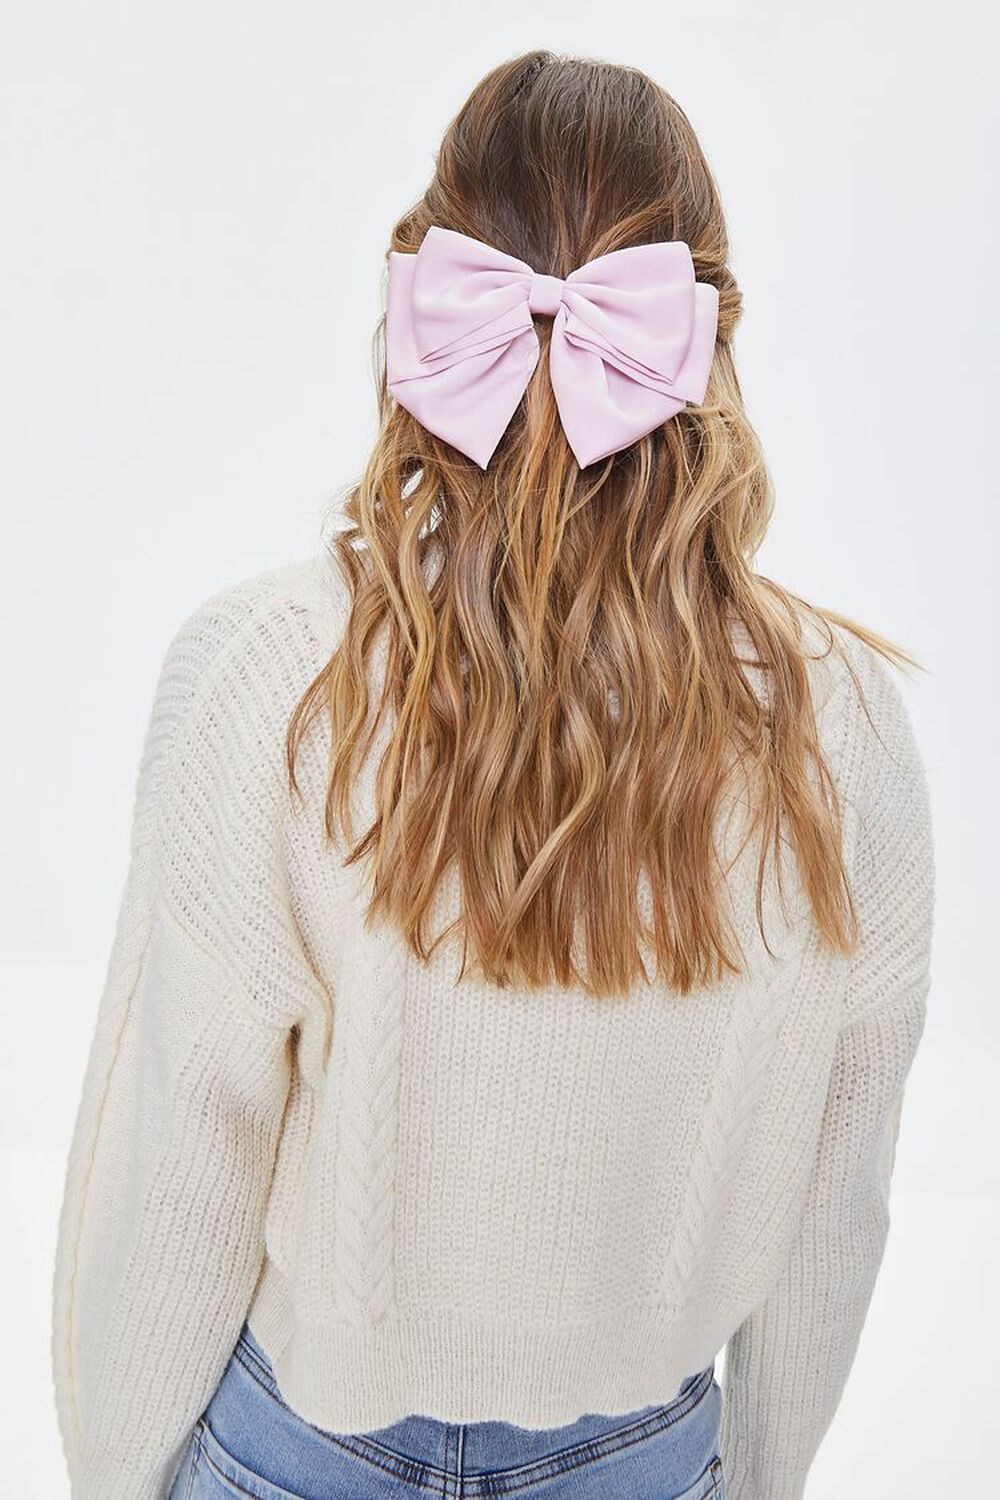 PINK Oversized Hair Bow, image 1